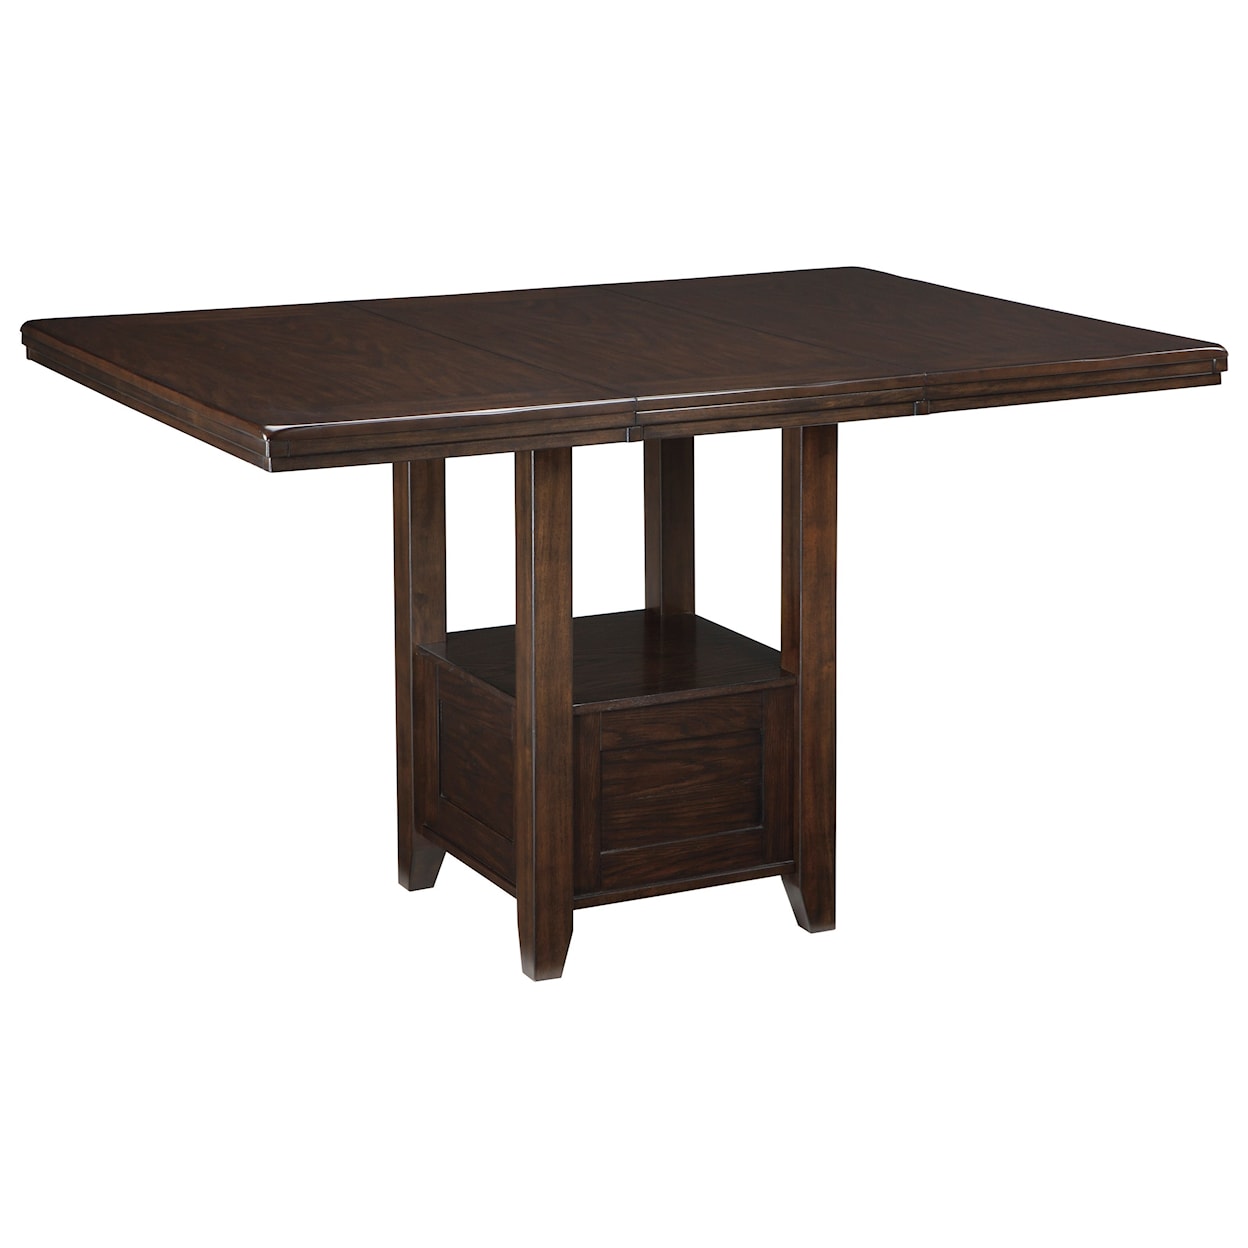 Signature Design by Ashley Haddigan 5-Piece Dining Room Counter Ext Table Set